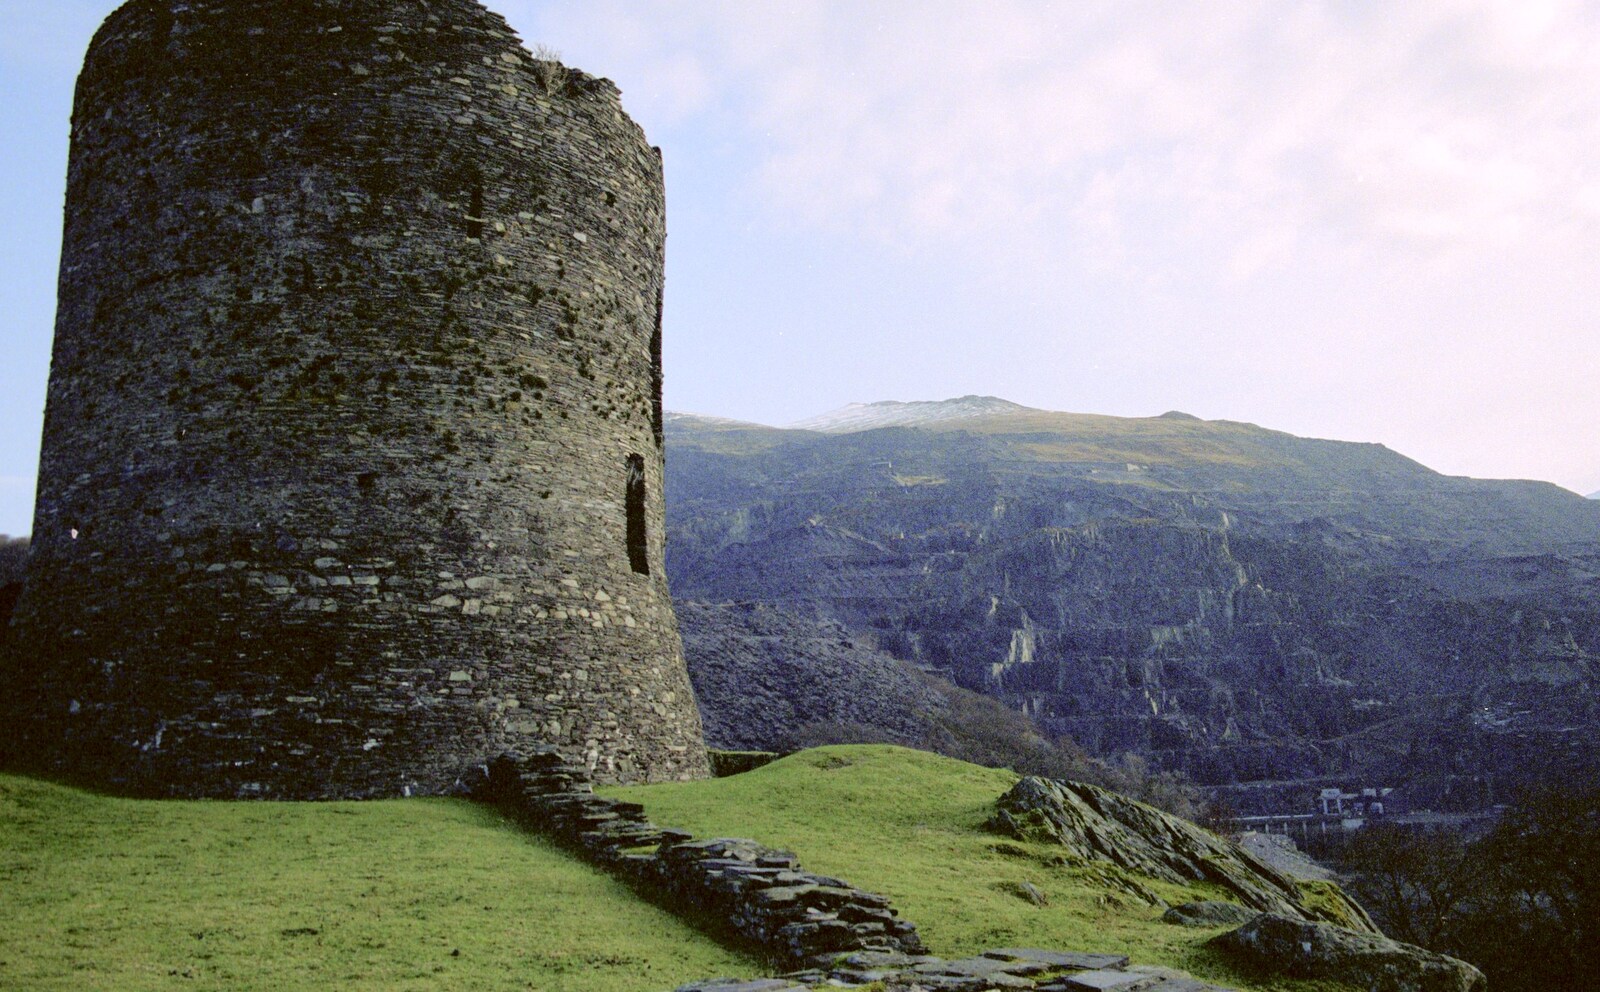 A derelict tower and some open-cast mining from Capel Curig to Abergavenny: A Road-Trip With Hamish, Wales - 3rd April 1992